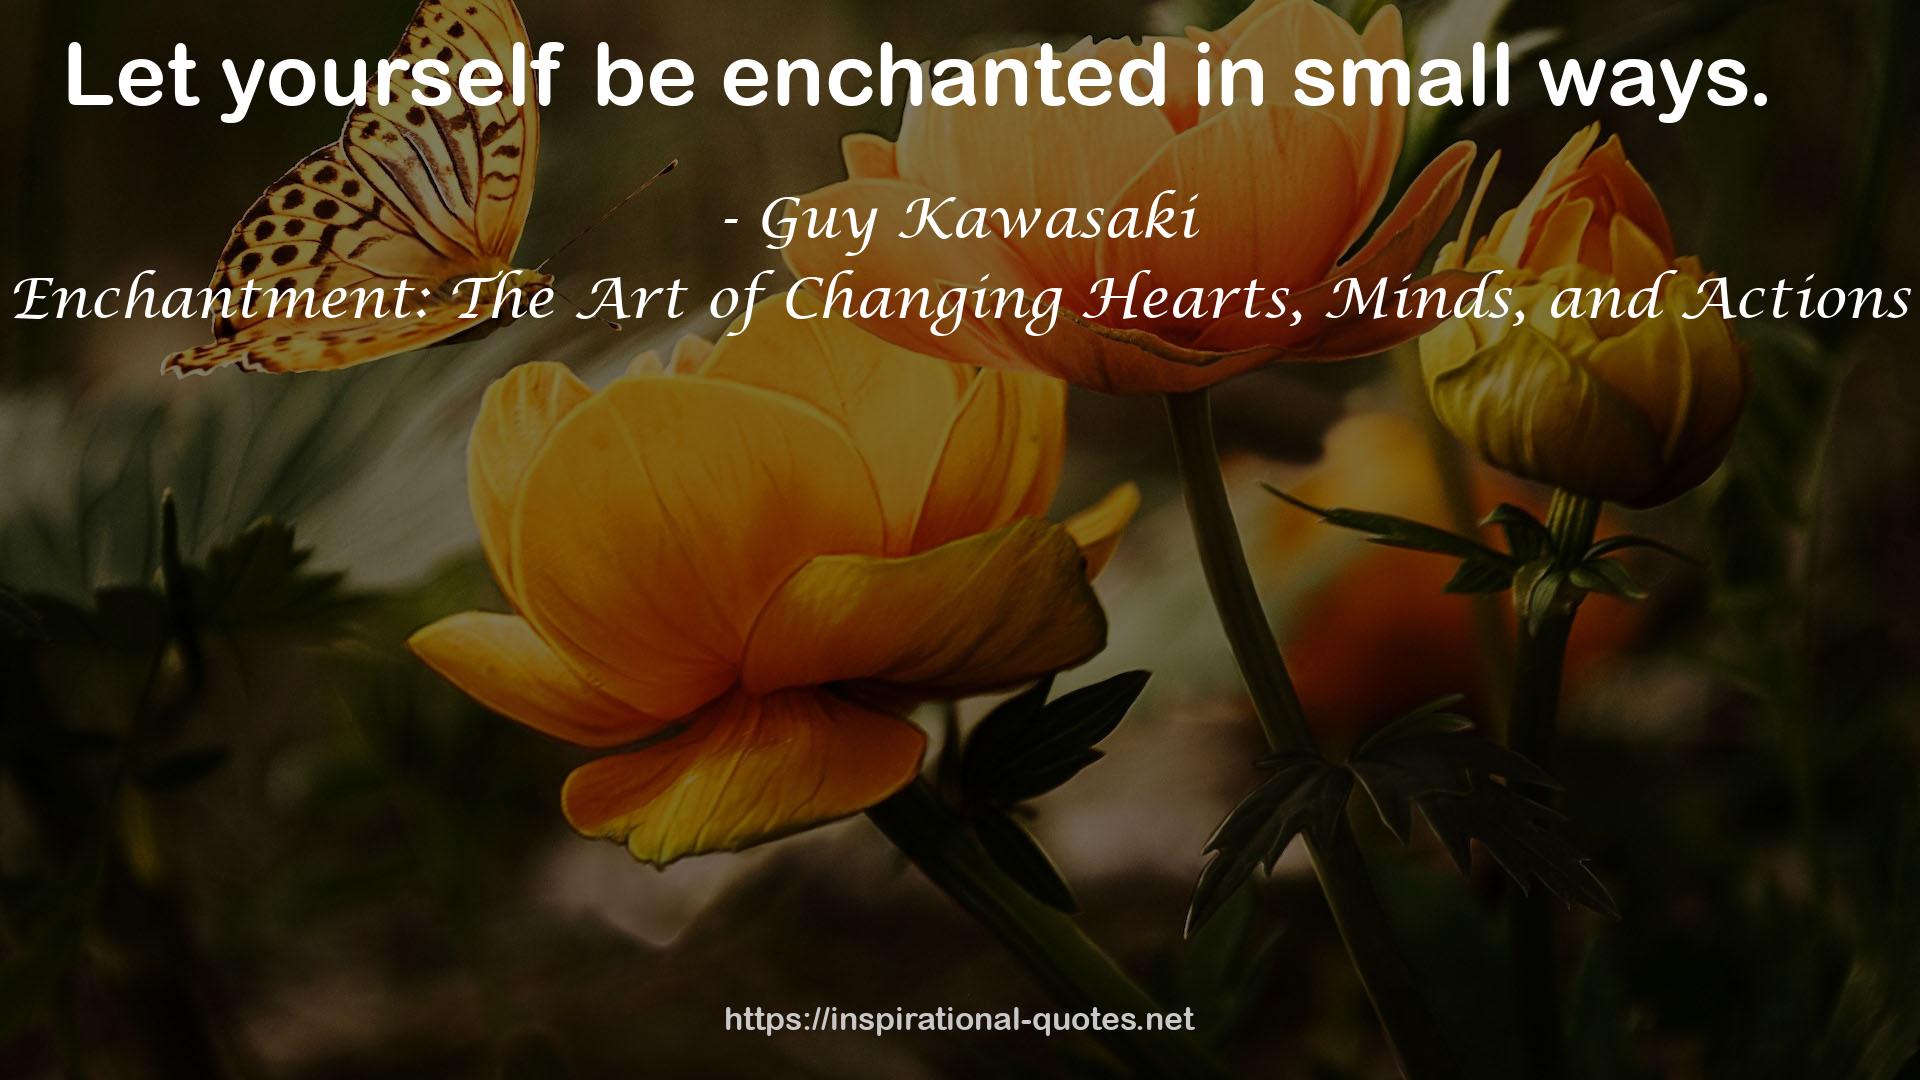 Enchantment: The Art of Changing Hearts, Minds, and Actions QUOTES